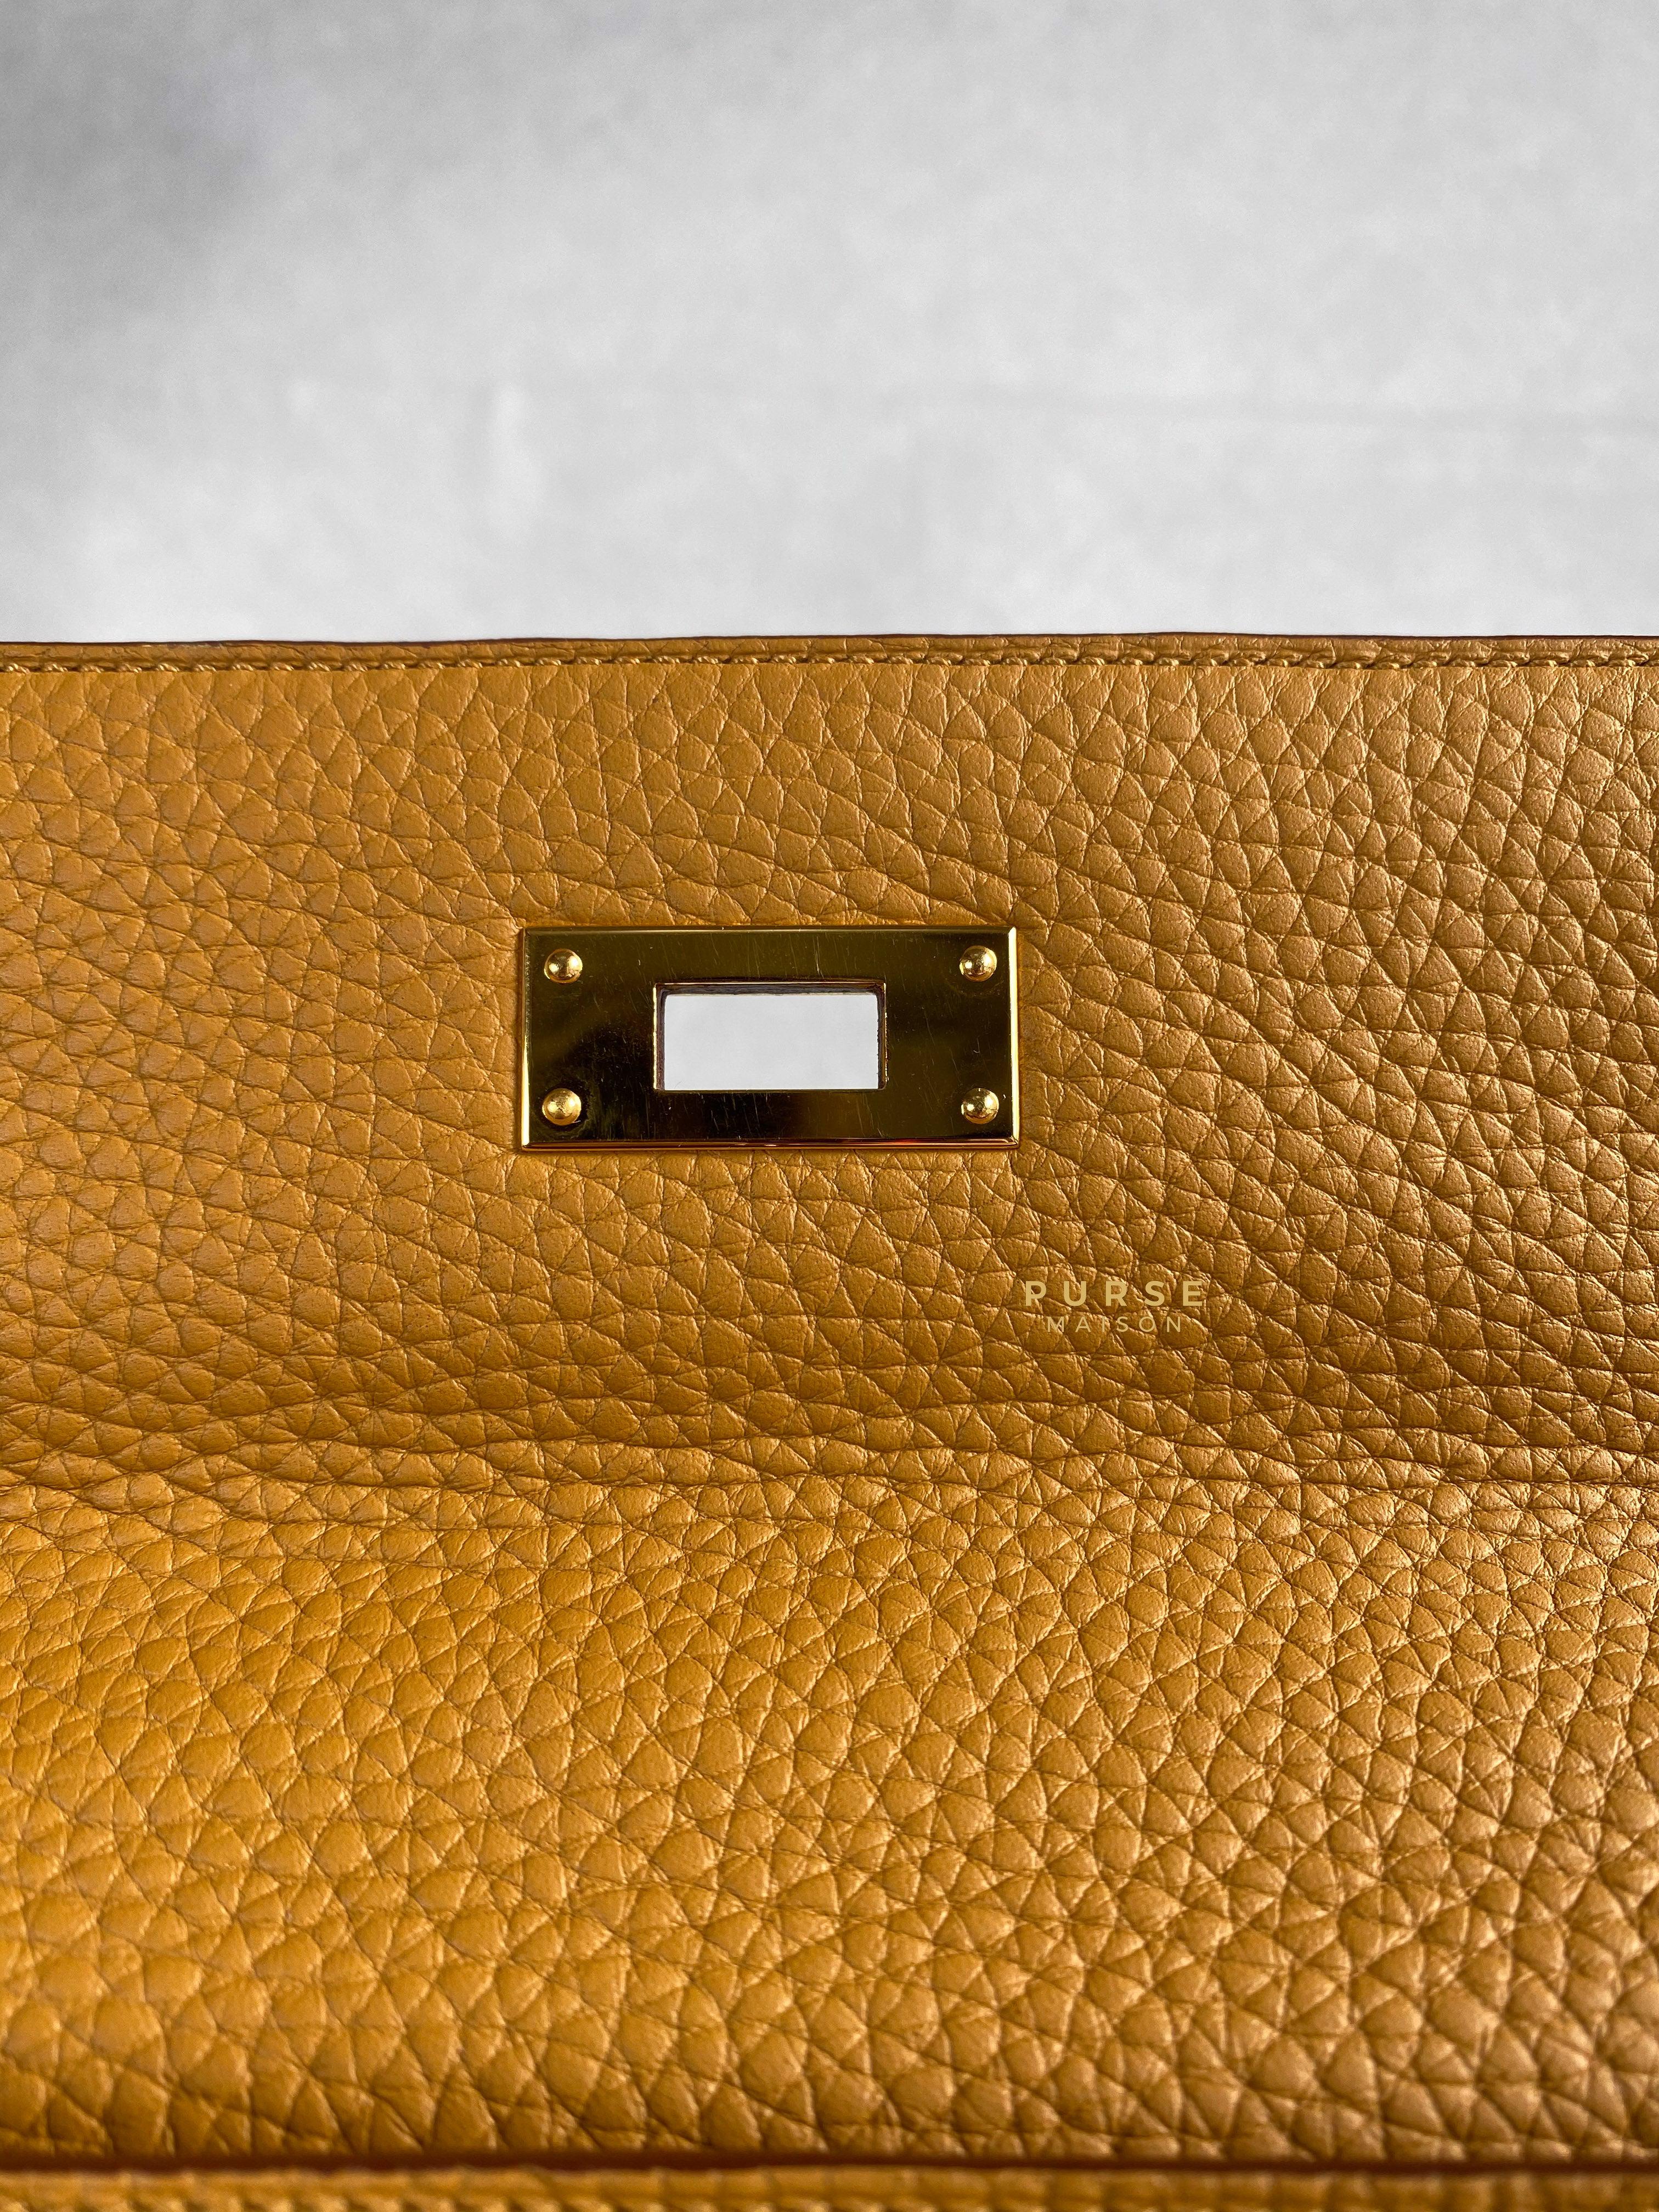 Hermes Kelly 28 Sesame in Clemence Leather and Gold Hardware Stamp Y (2020) | Purse Maison Luxury Bags Shop